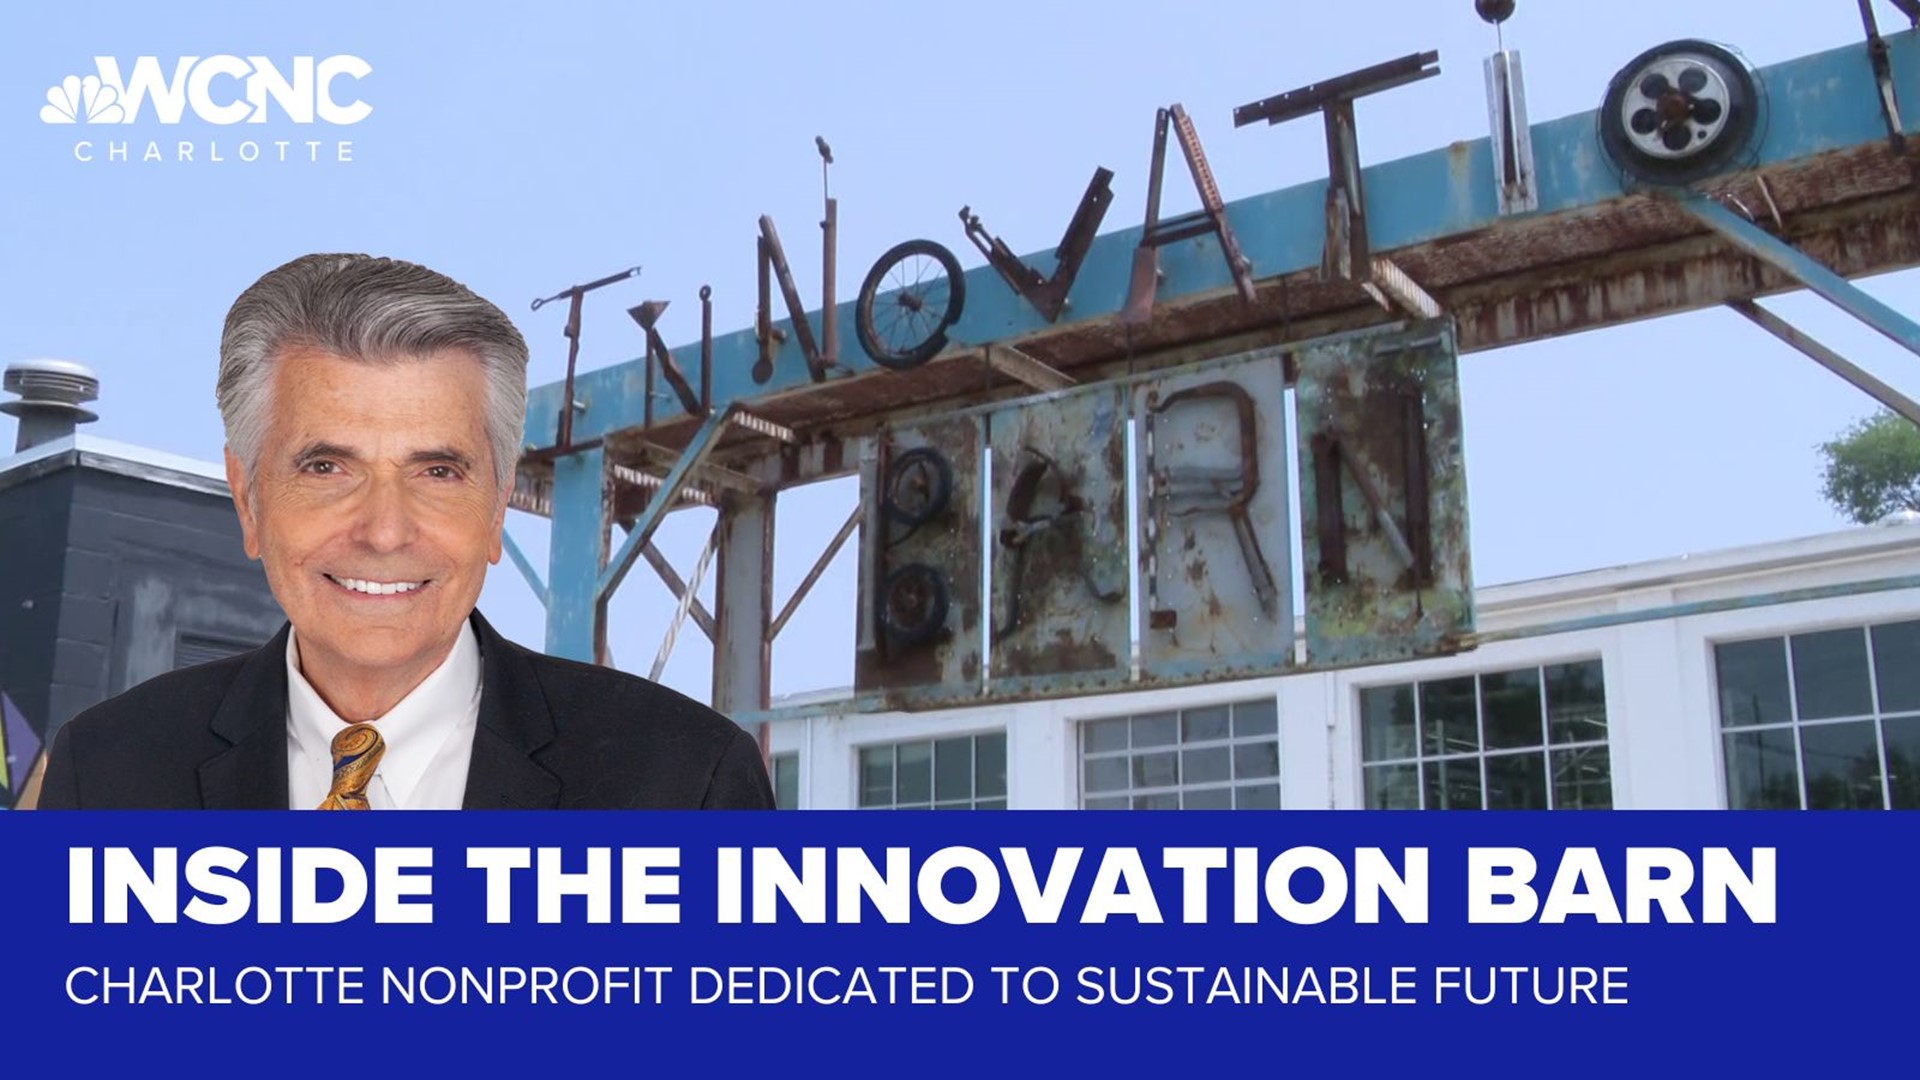 Larry Sprinkle takes a tour of the Innovation Barn, a Charlotte nonprofit that's dedicated to creating a sustainable future.